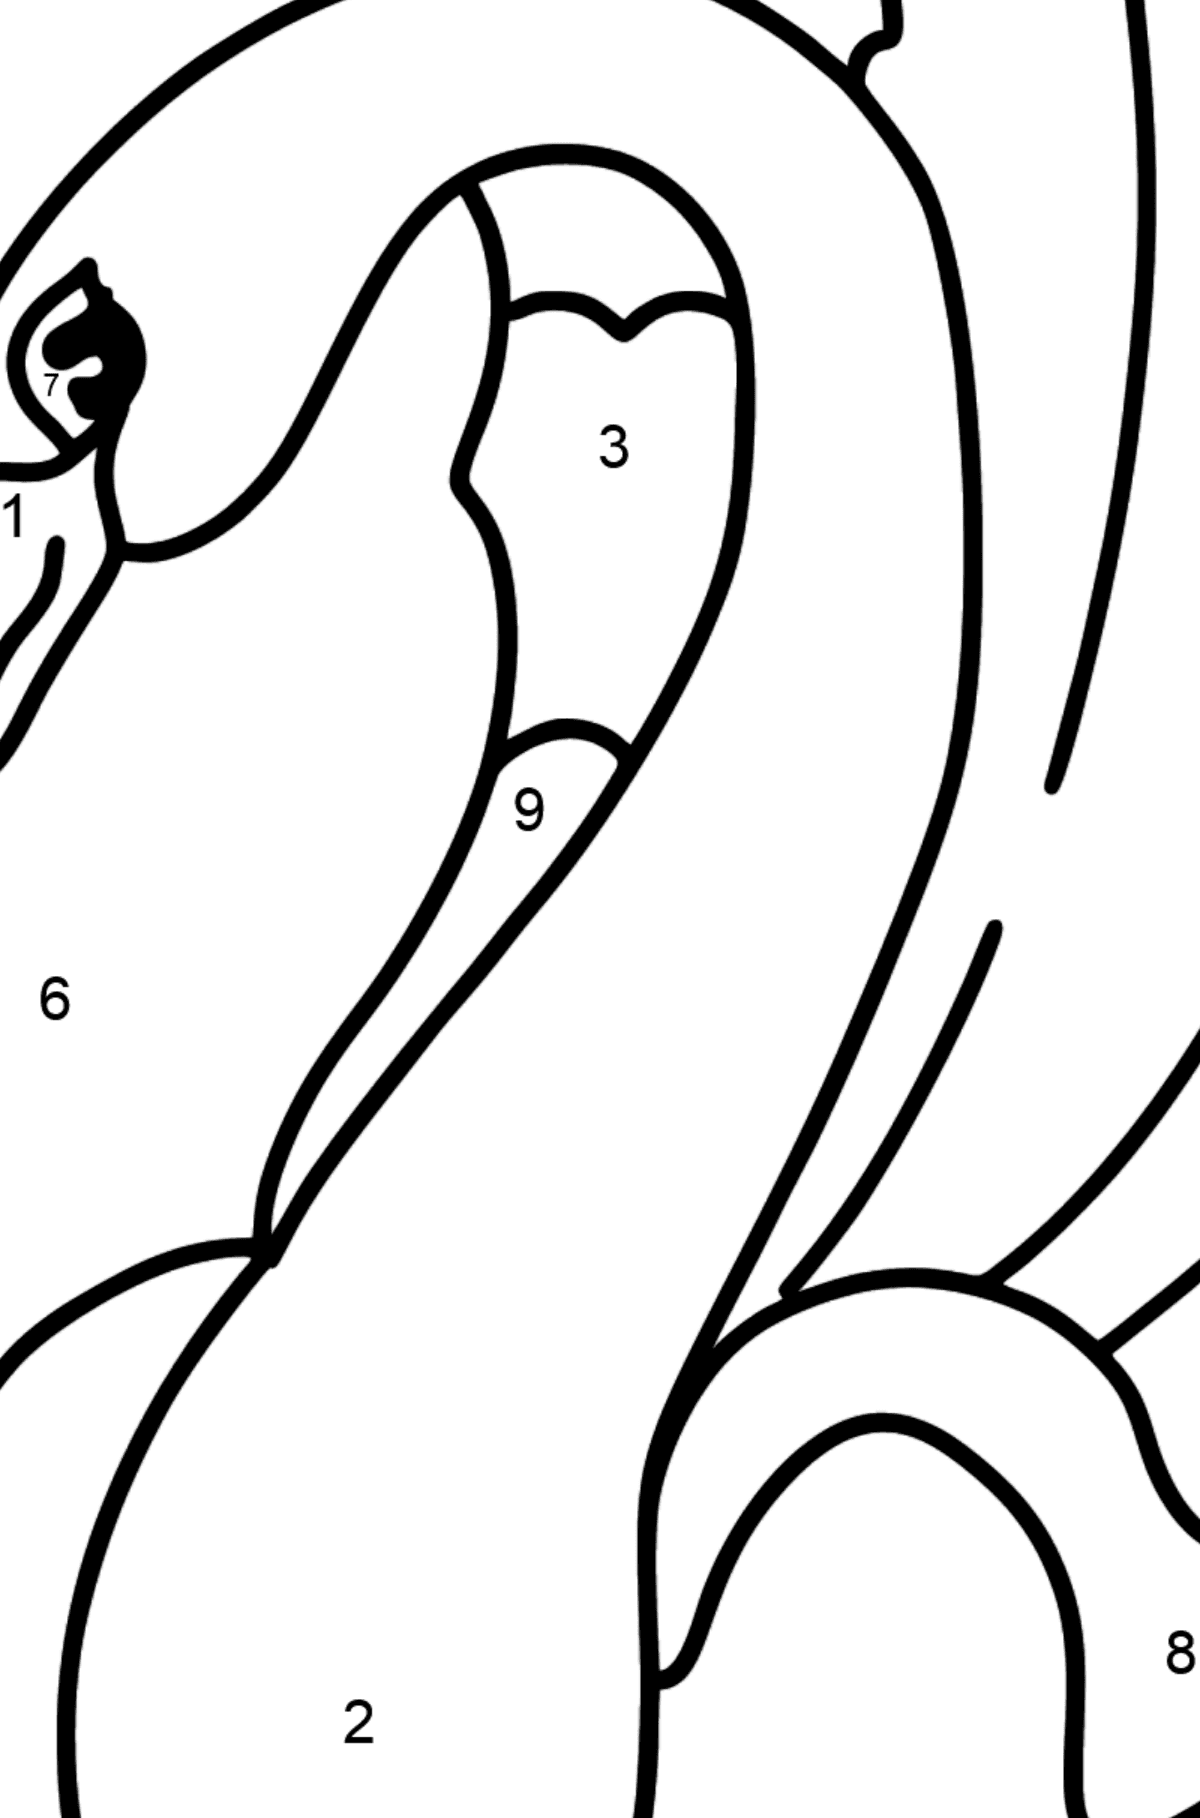 Black Swan coloring page - Coloring by Numbers for Kids